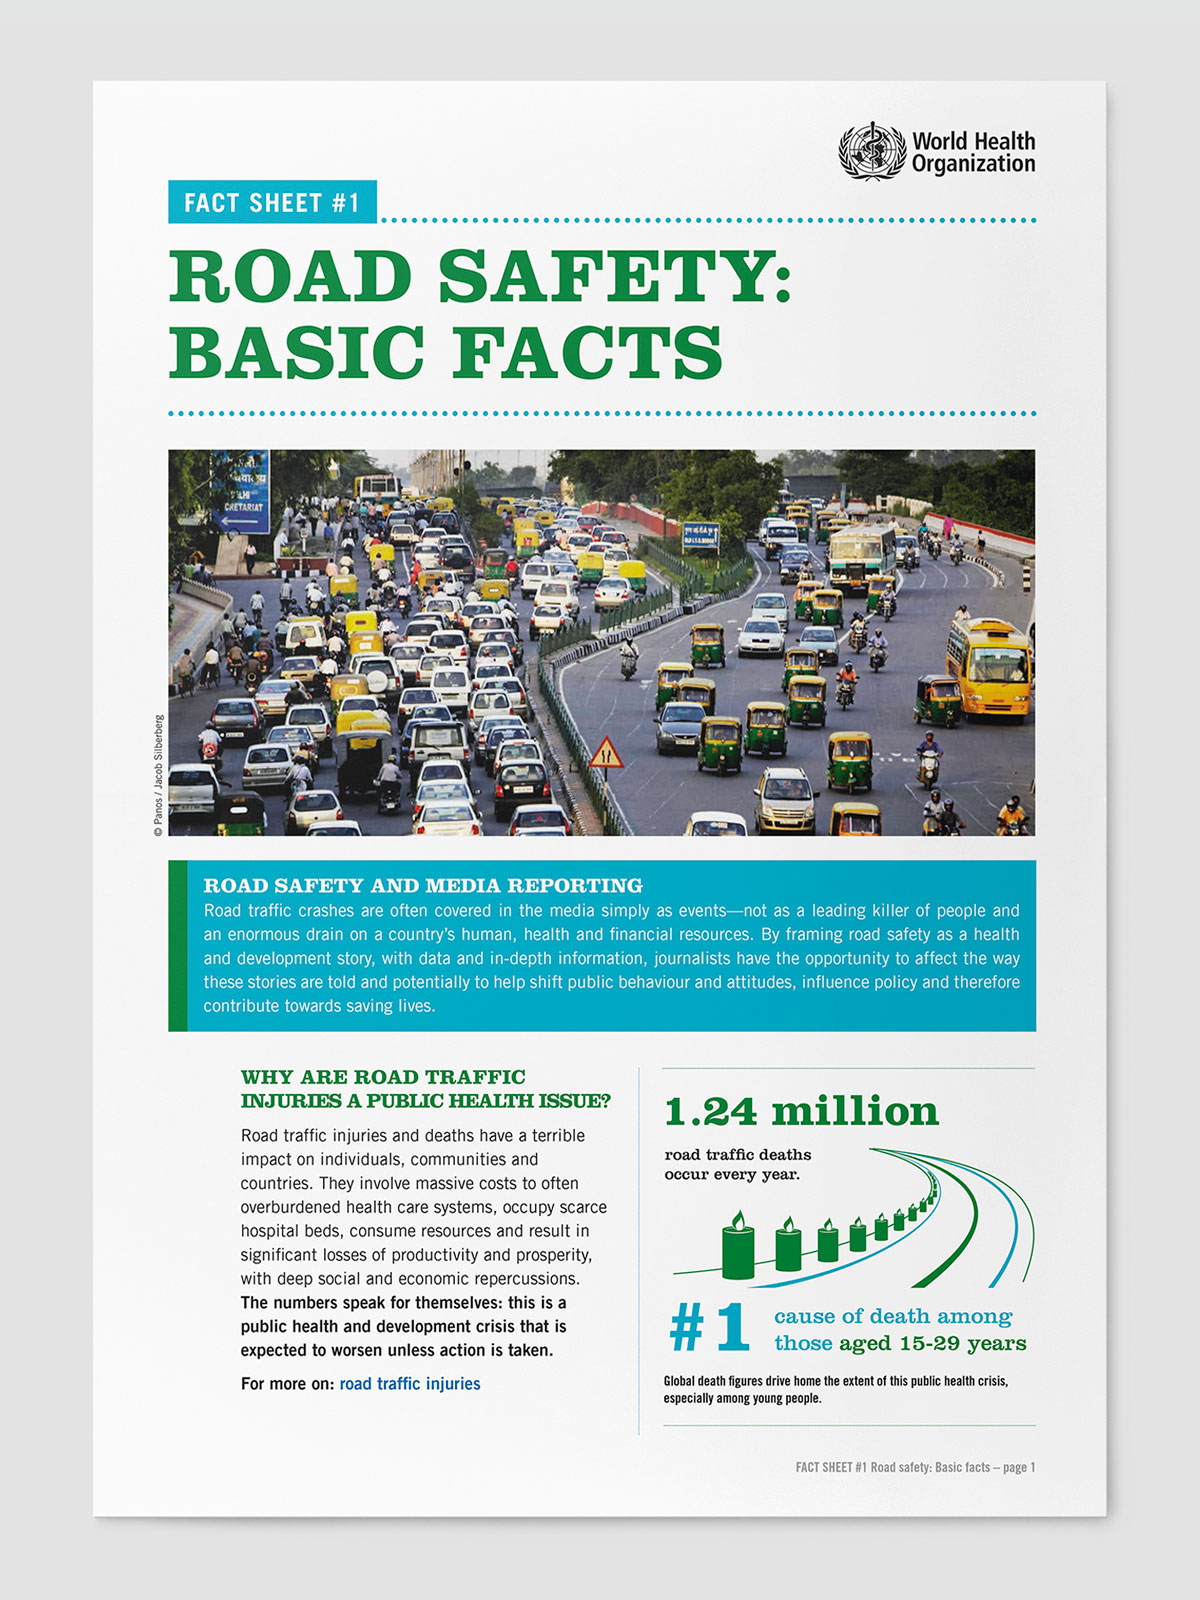 oms_road_safety_facts_1.jpg